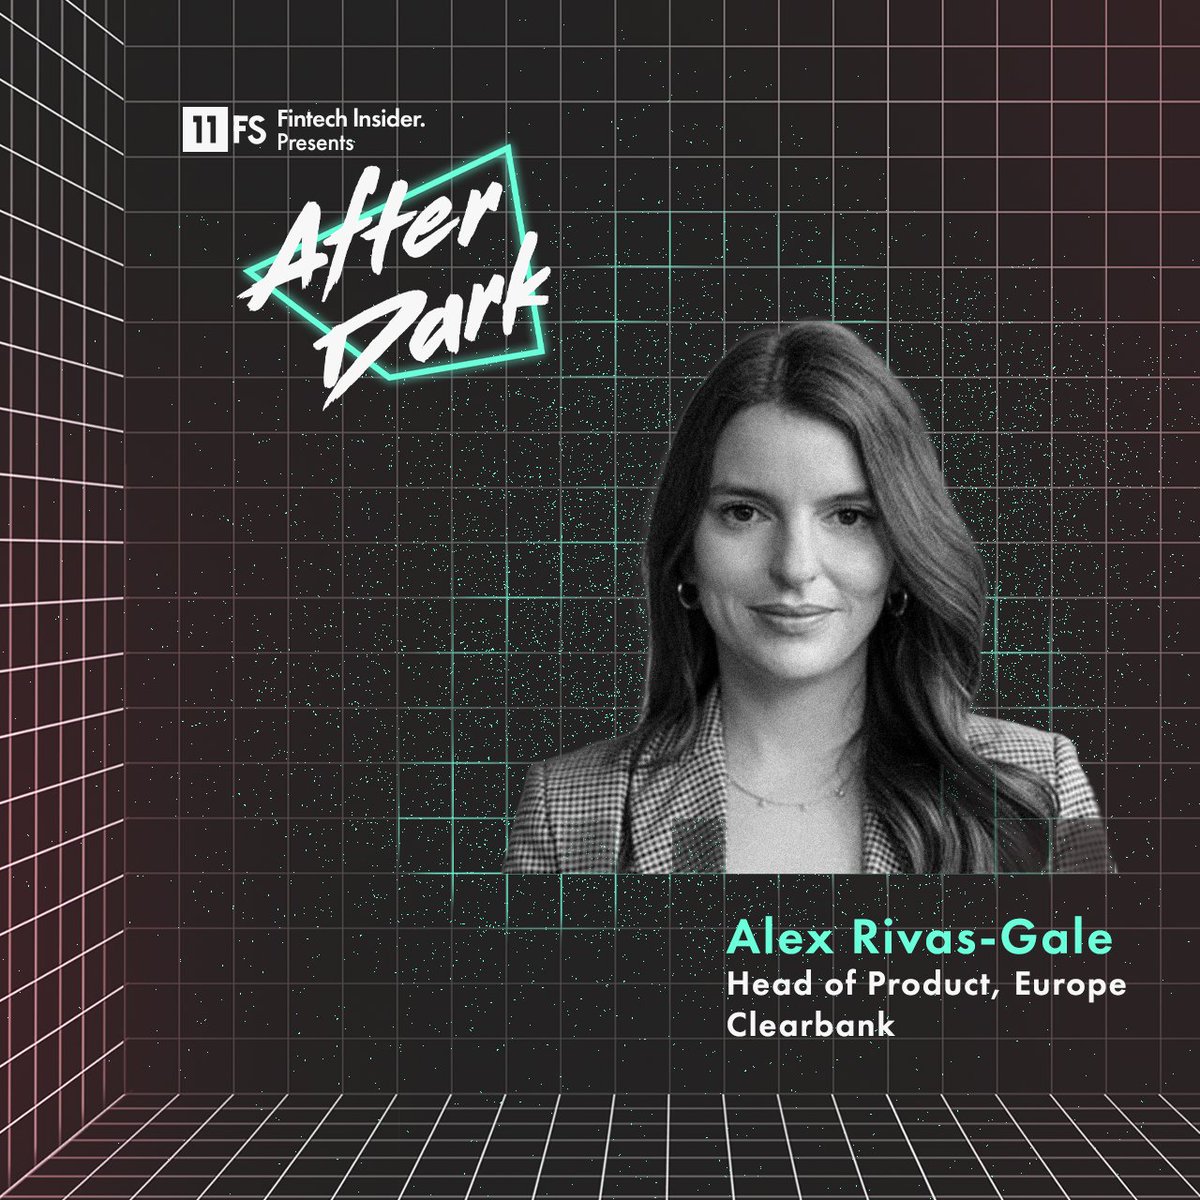 📢 Just in! Our #AfterDarkLDN speaker line-up is complete! Joining @davidbrear, @JCtheOriginal, and @GECFrost live on stage at Village Underground will be @clear_bank's Head of Product, Europe, Alex Rivas-Gale. 🙌